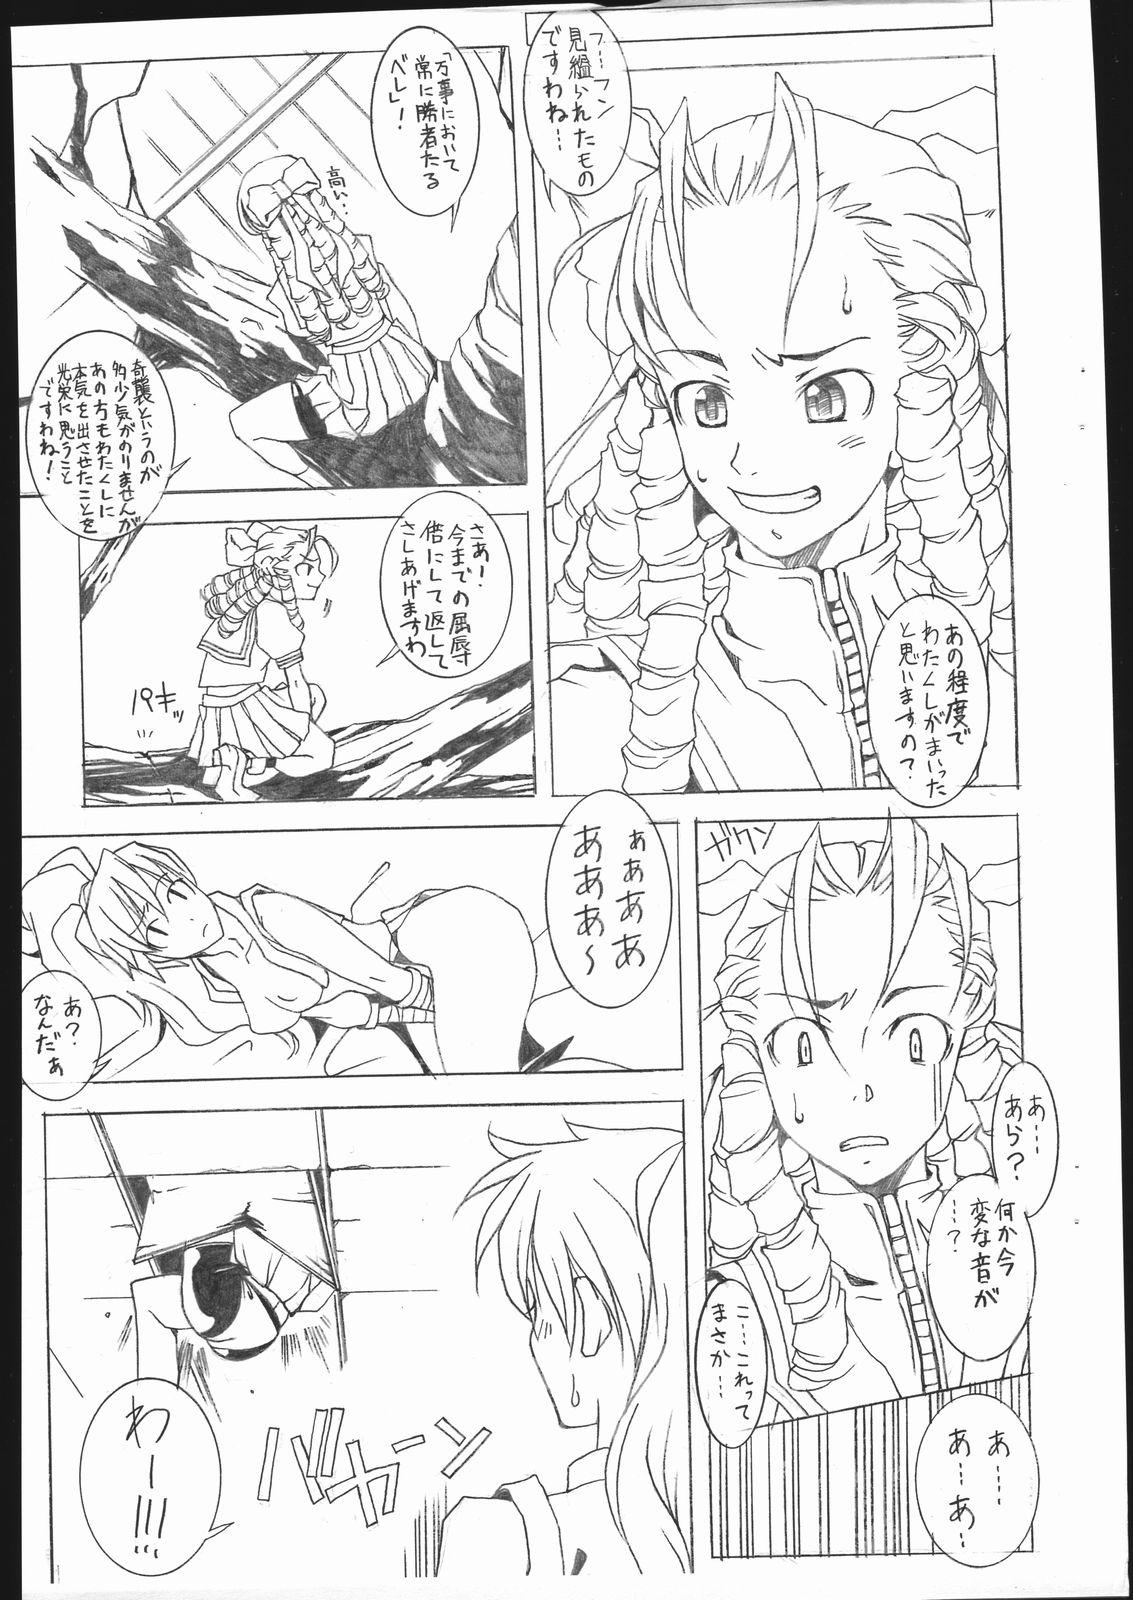 Woman M&K - Street fighter Final fight Glamour - Page 7